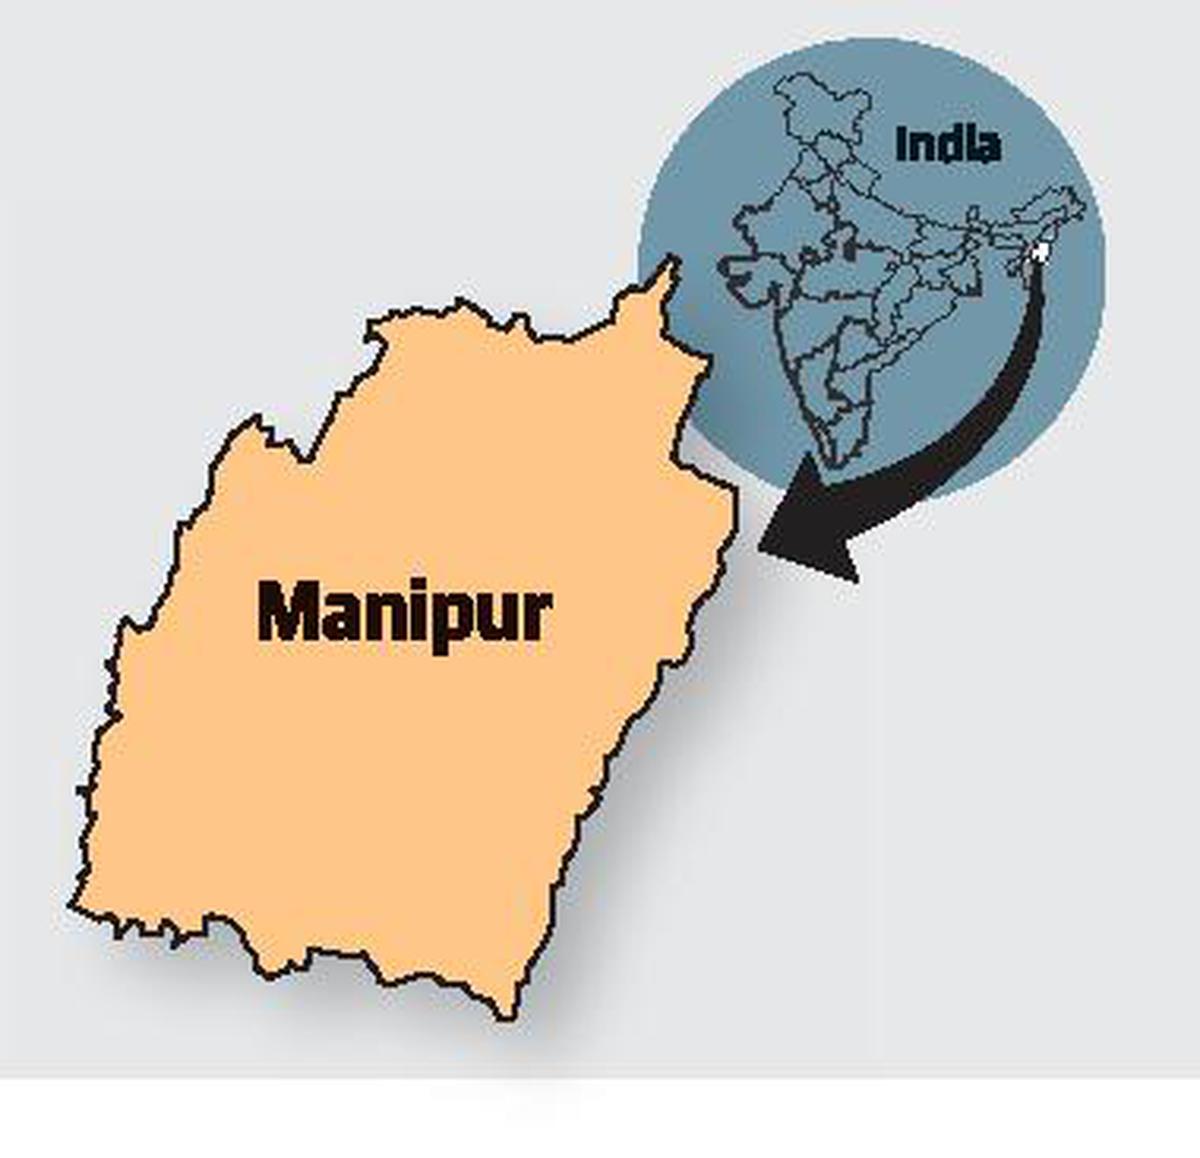 On the mystery of livestock deaths in Manipur - The Hindu